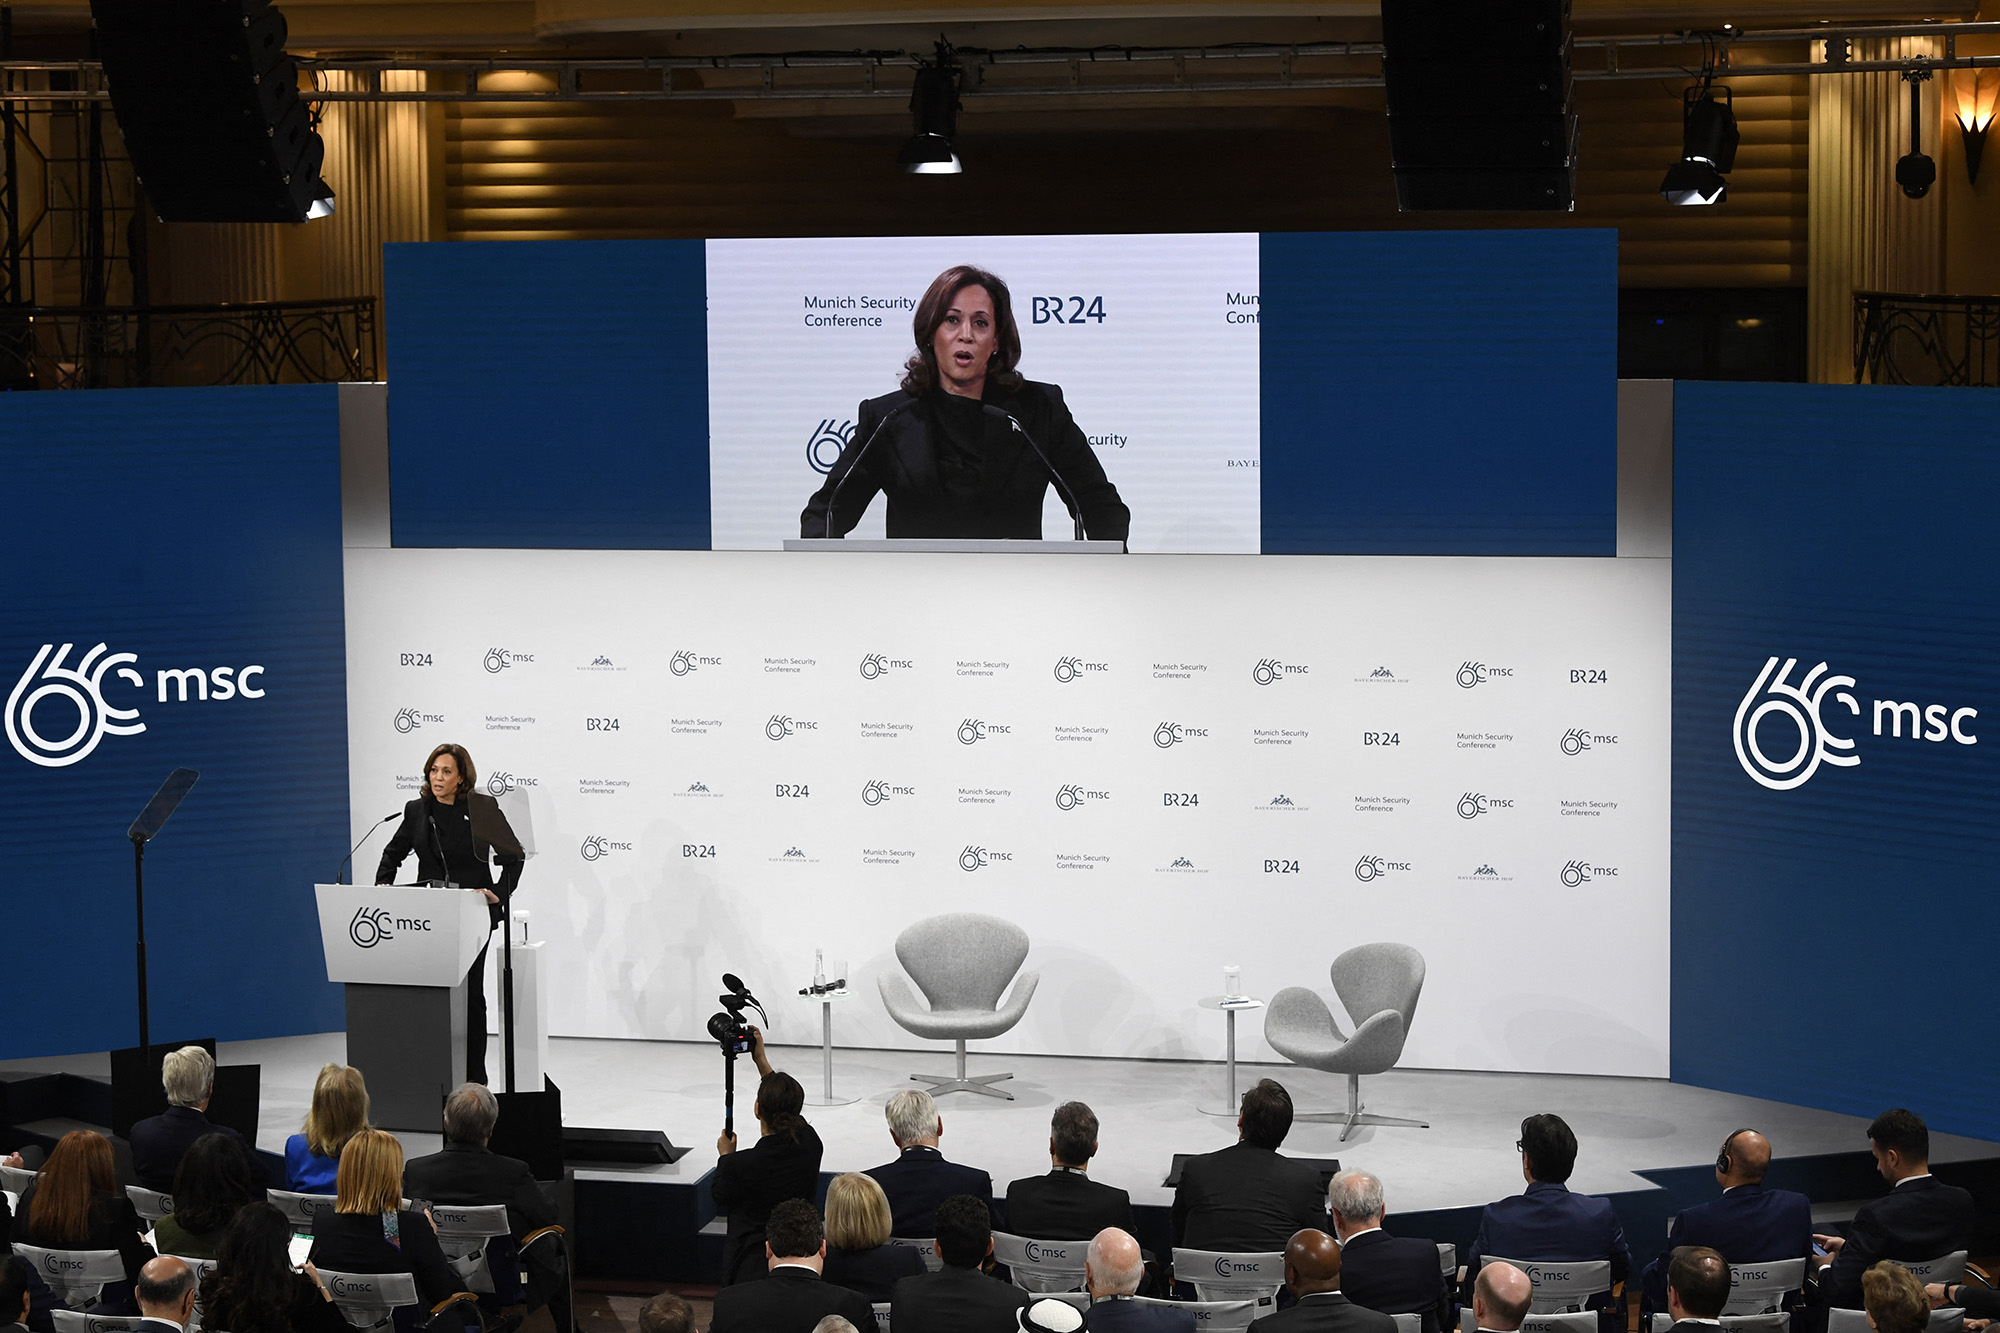 US Vice President Kamala Harris delivers her speech during the opening of the 60th Munich Security Conference (MSC) at the Bayerischer Hof Hotel in Munich, Germany, on February 16.